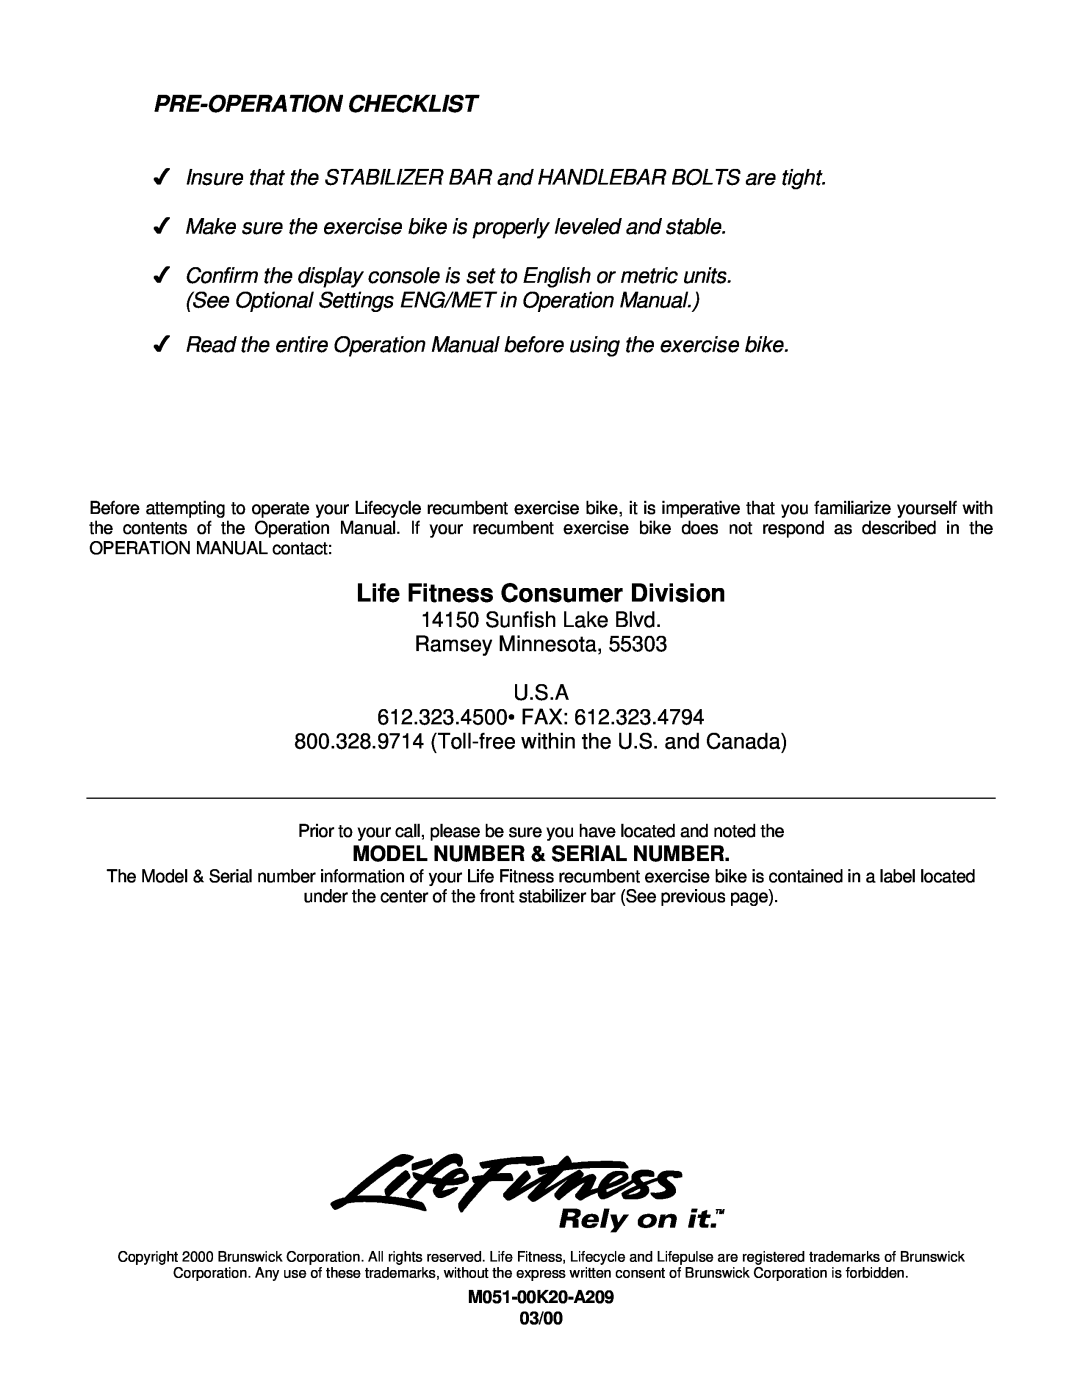 Life Fitness C7, C9 manual Life Fitness Consumer Division, Pre-Operation Checklist, Toll-free within the U.S. and Canada 